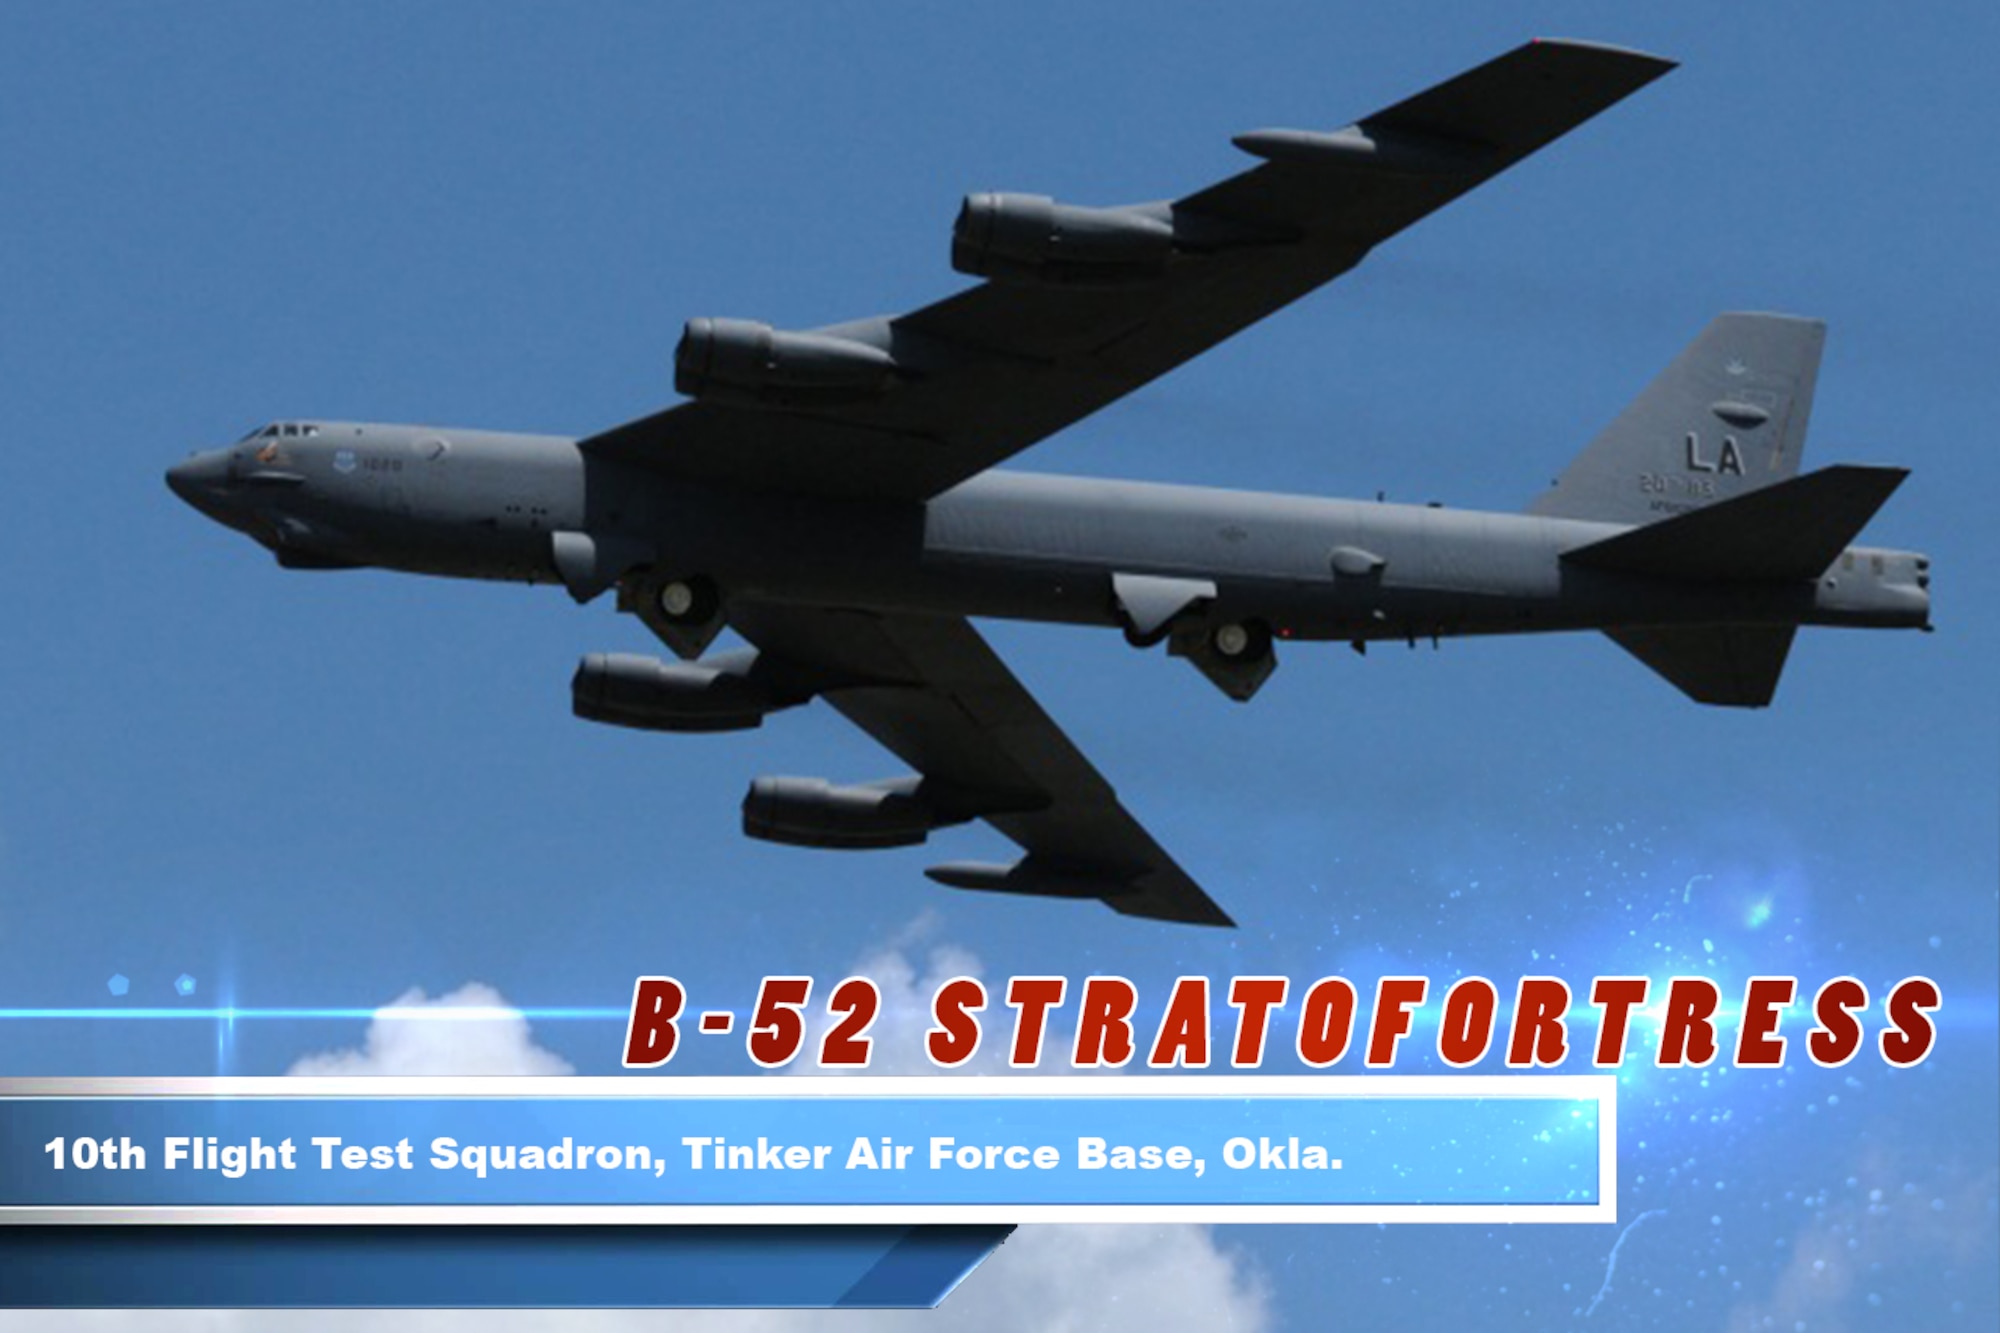 The B-52 is a long-range, heavy bomber that can perform a variety of missions. The bomber is capable of flying at high subsonic speeds at altitudes up to 50,000 feet (15,166.6 meters). It can carry nuclear or precision guided conventional ordnance with worldwide precision navigation capability.